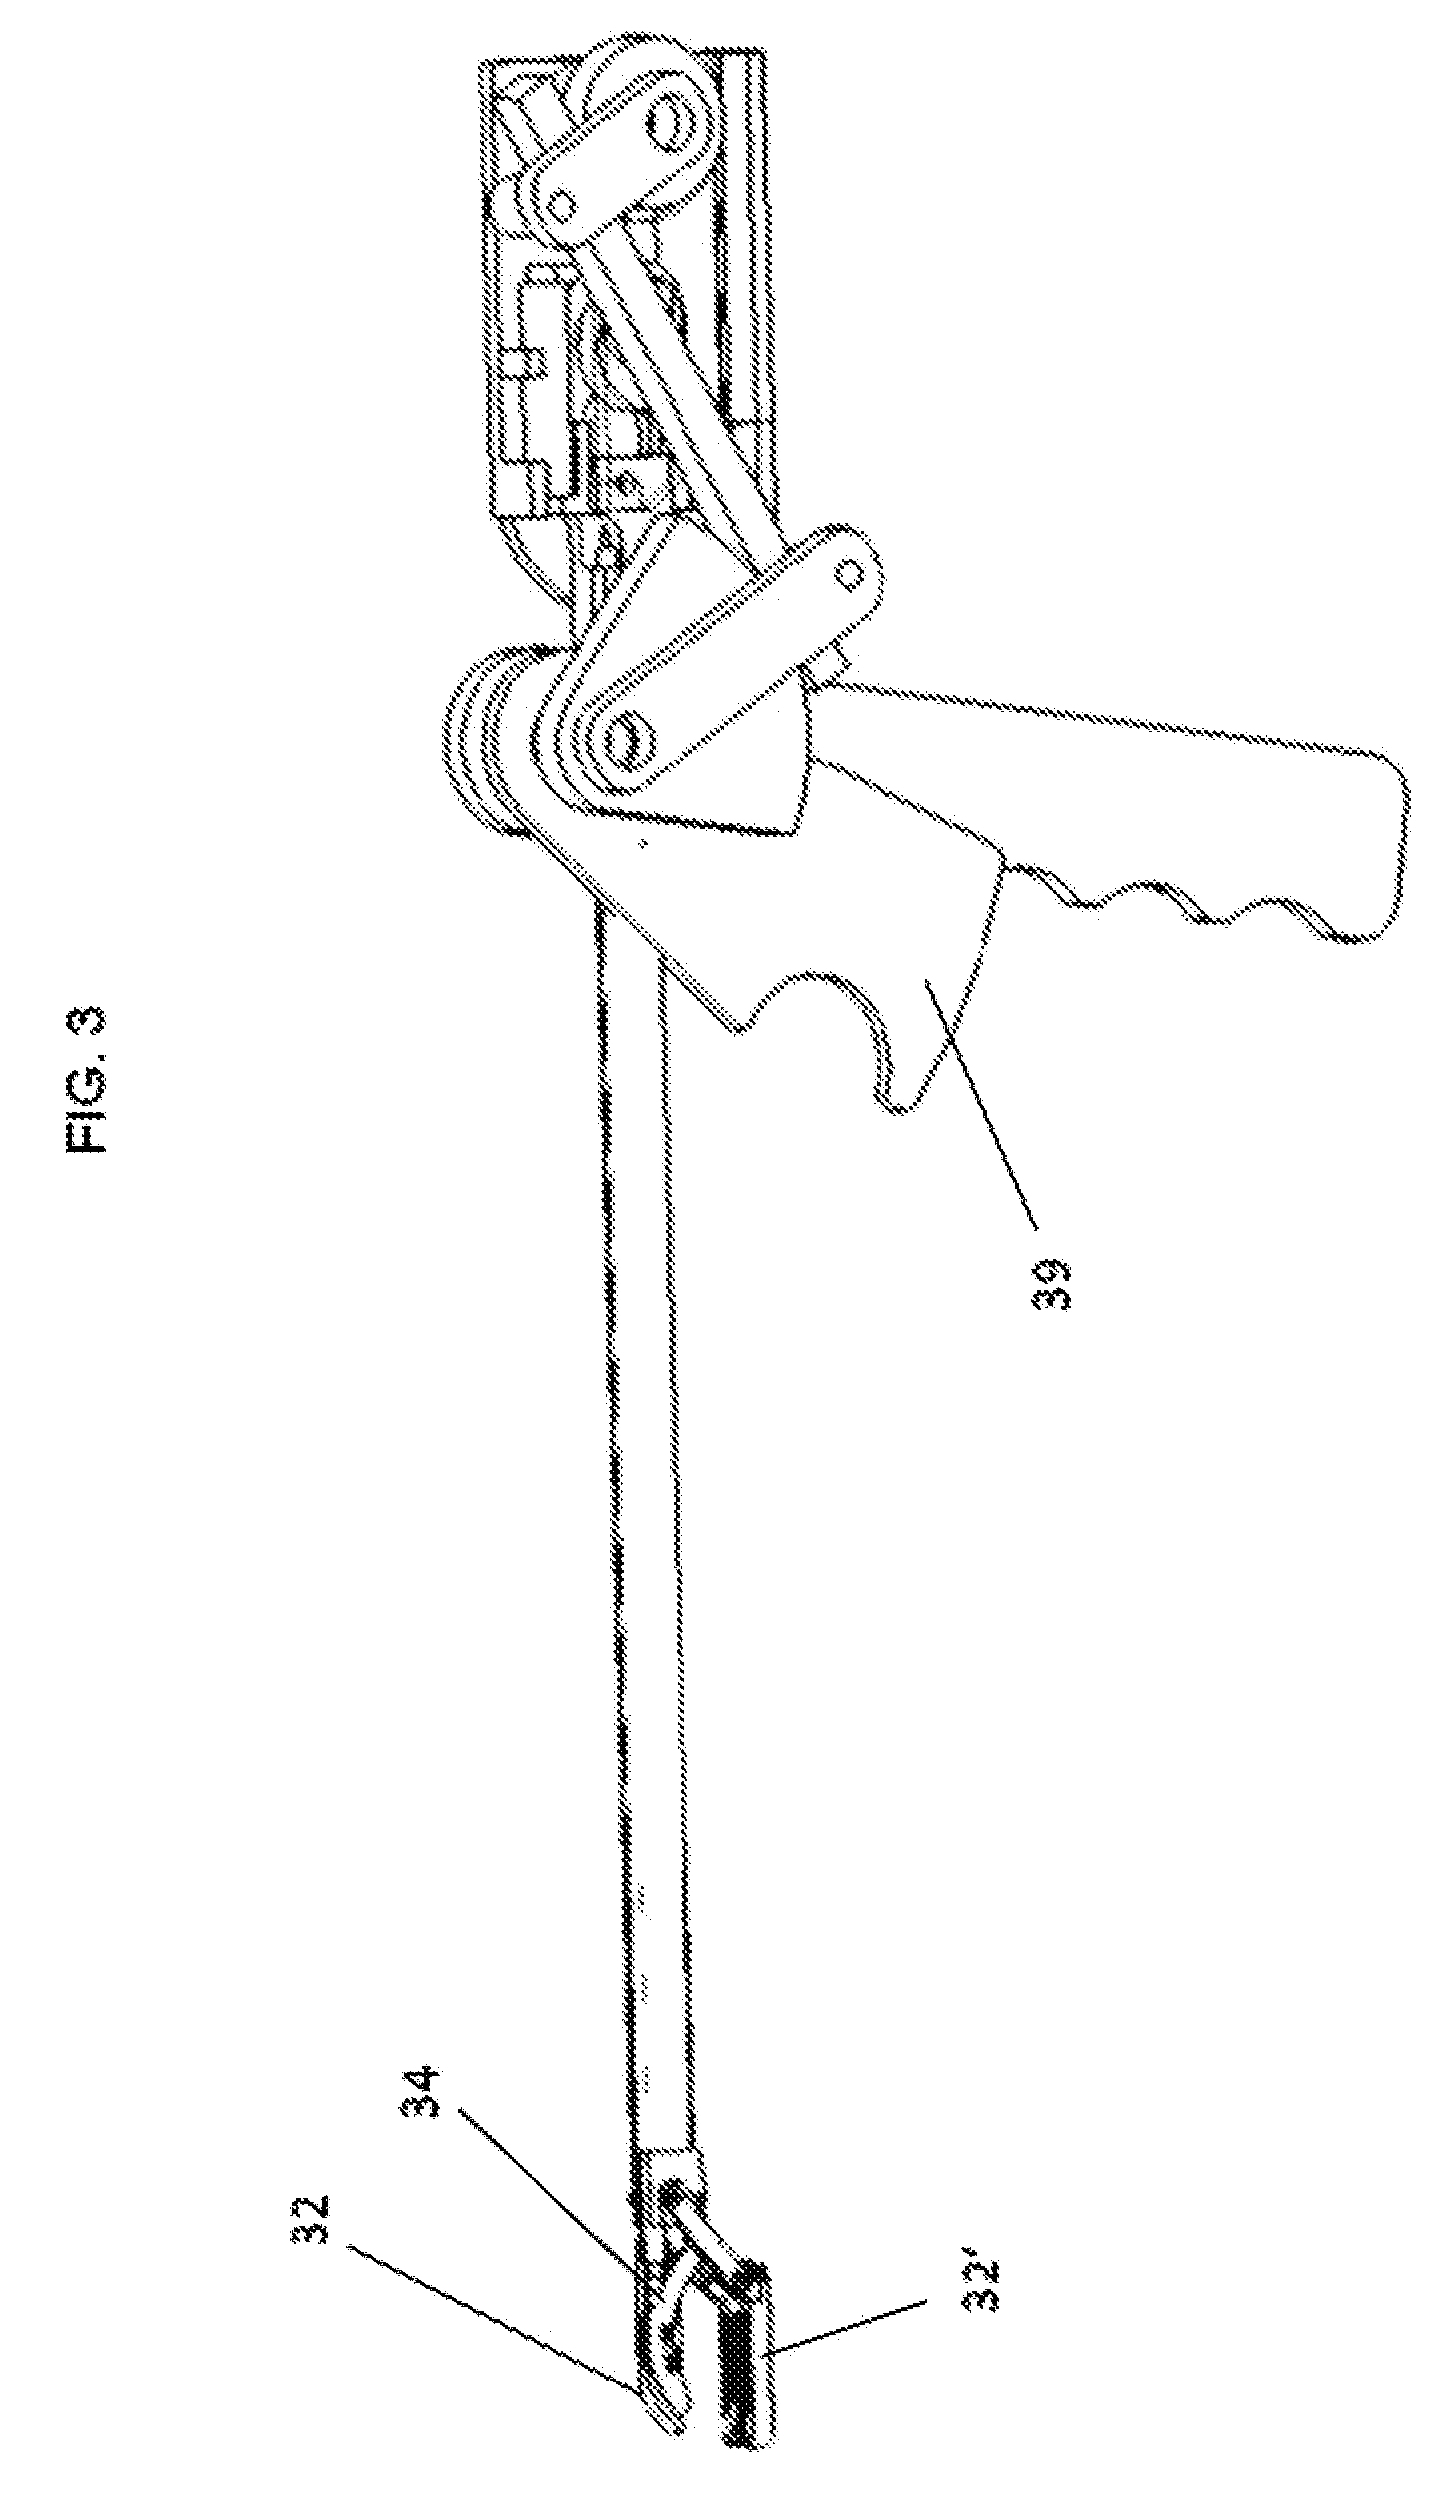 Methods and devices for continuous suture passing